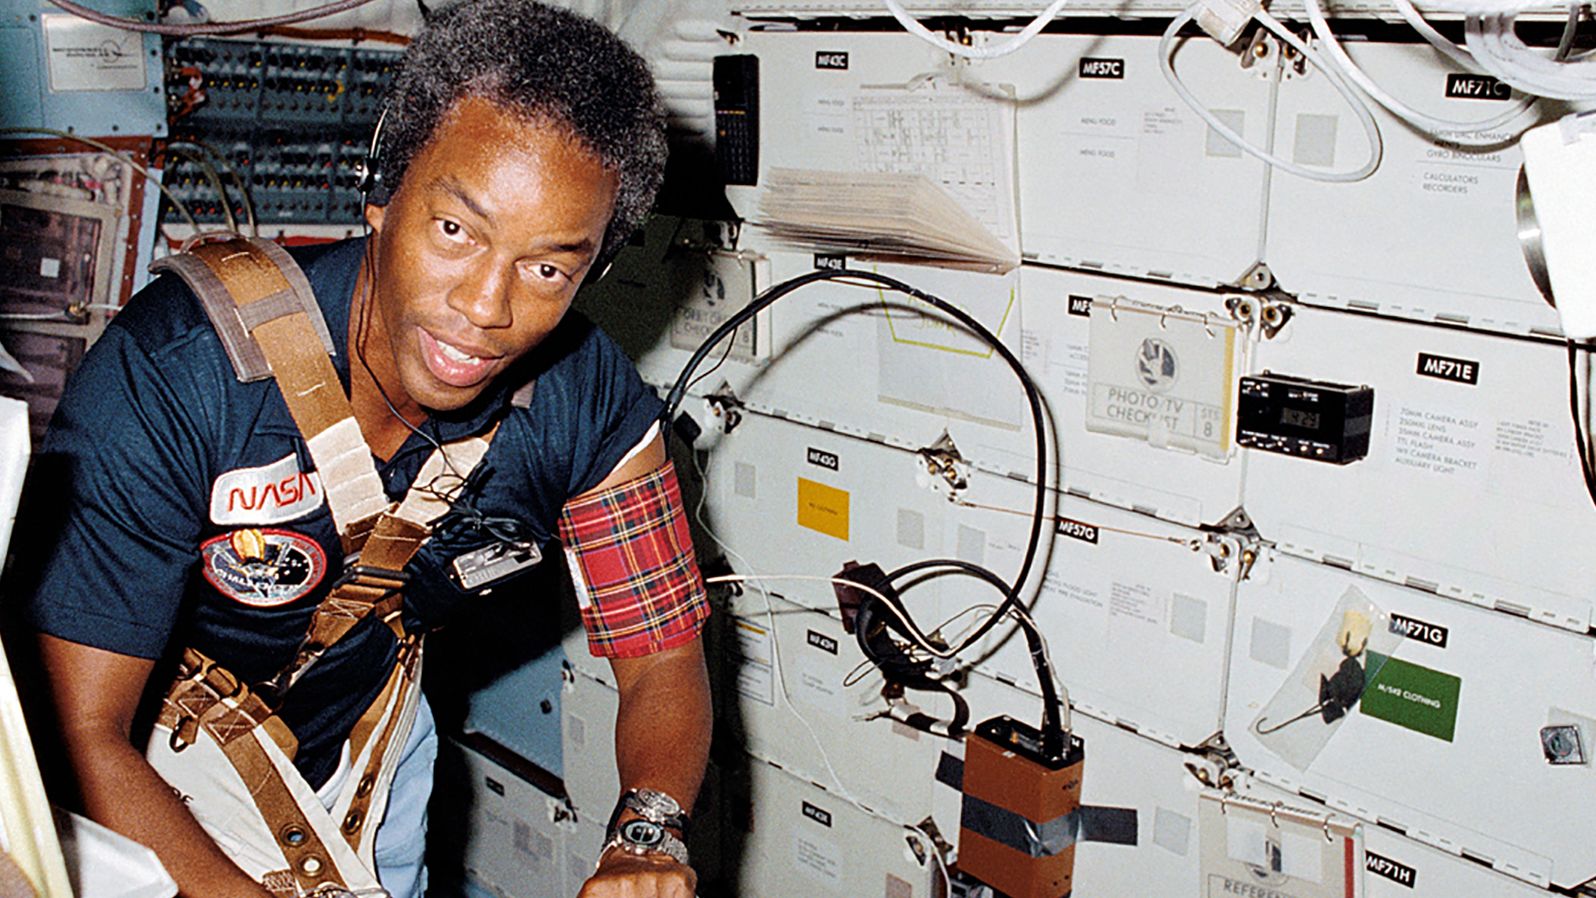 Guion "Guy" Bluford was the first African-American to go into space. He was a mission specialist on the space shuttle Challenger in 1983.